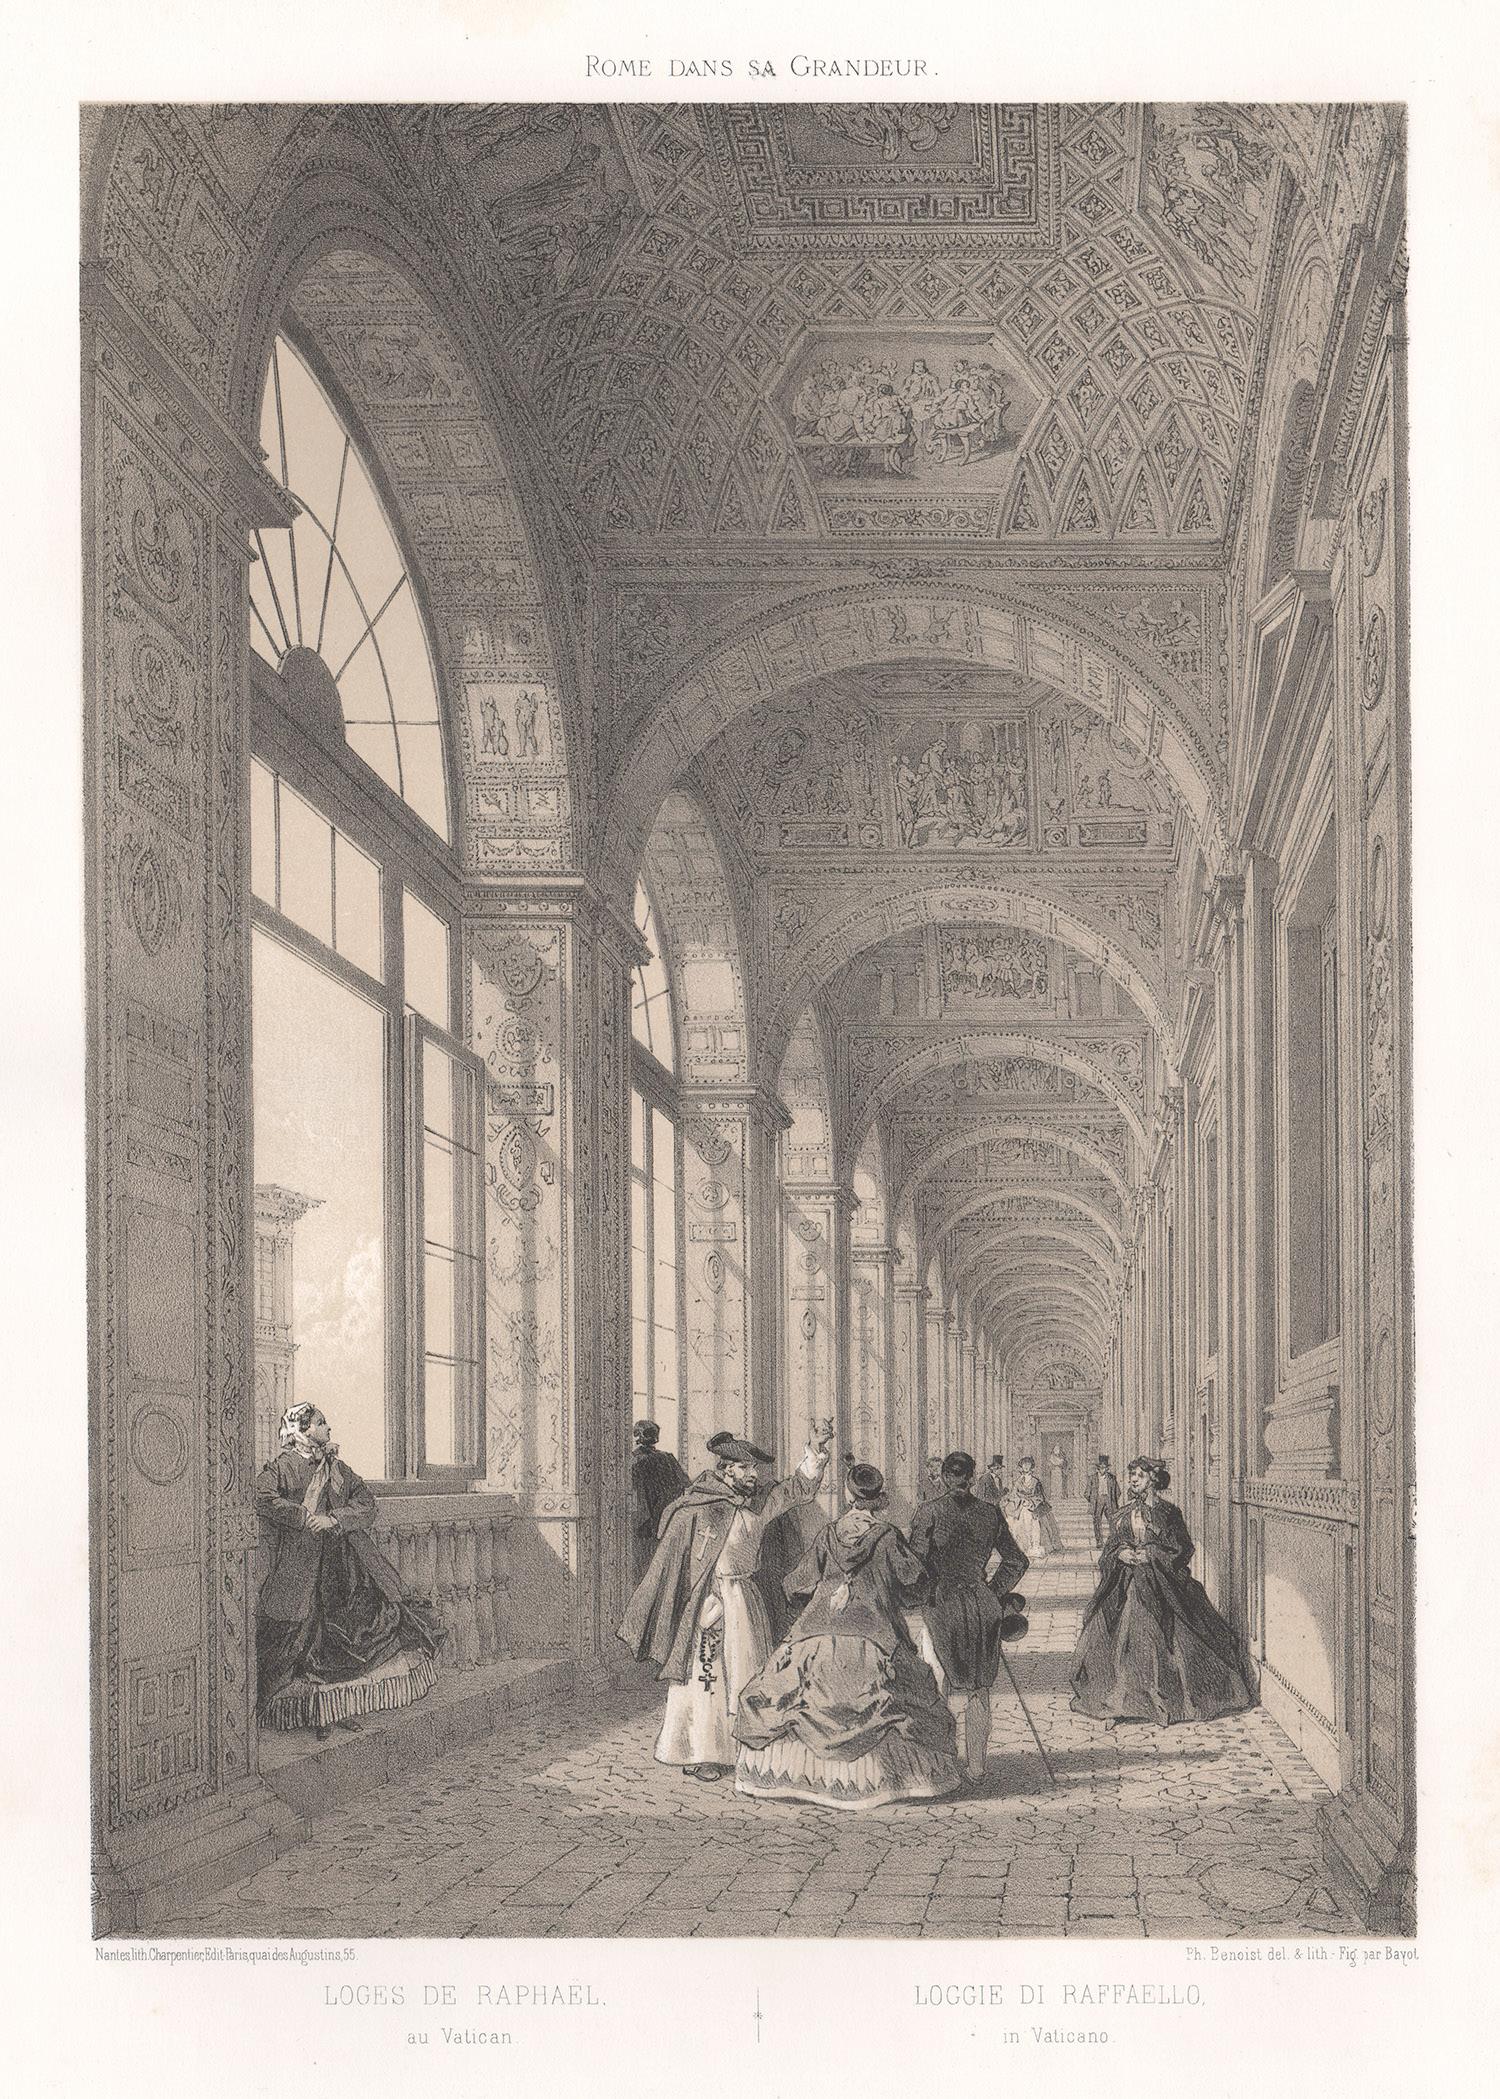 Loggia of Raphael, Vatican, Rome, Italy. Tinted lithograph by Philippe Benoist